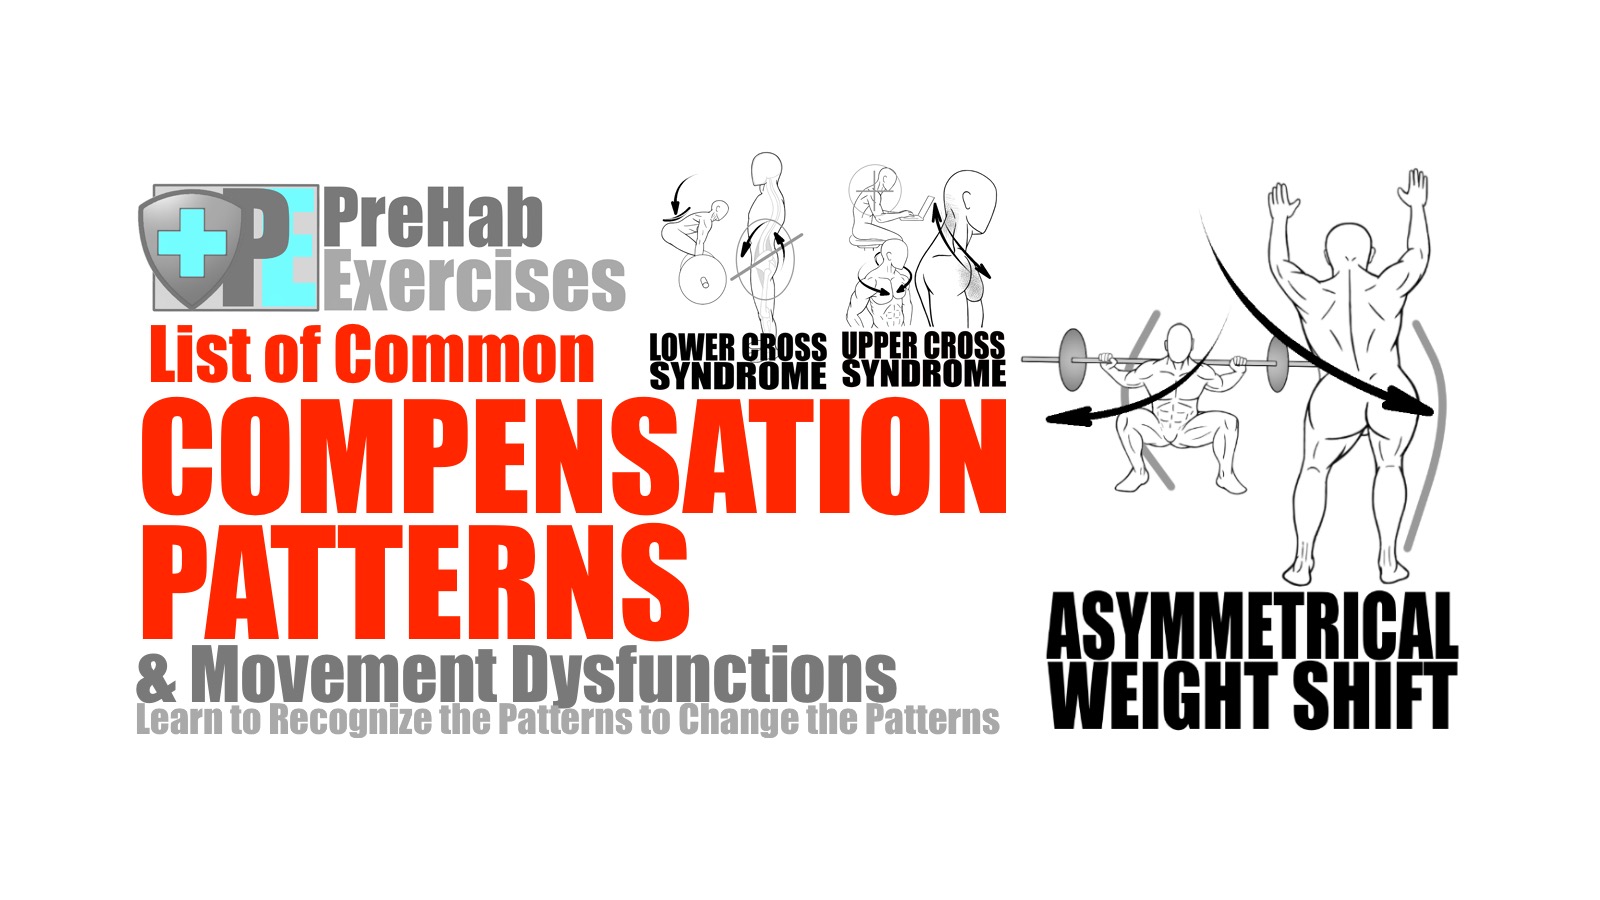 List of Common Compensation Patterns and Movement Dysfunctions